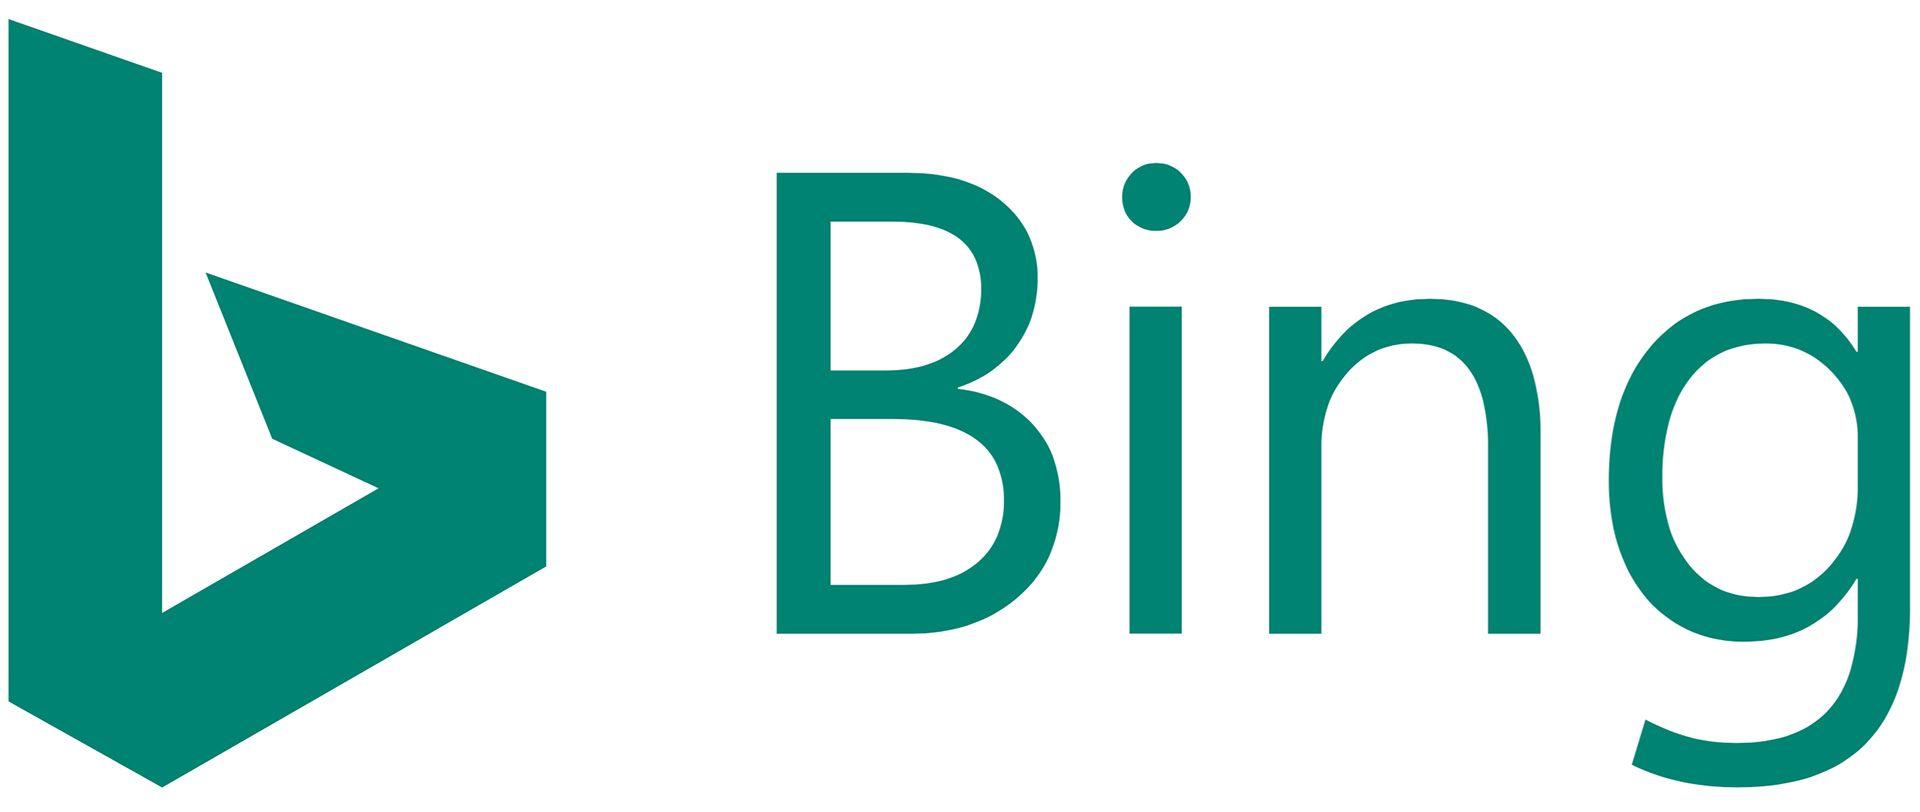 Bing Apps Logo - Edit Keyword Opportunities on Bing Ads iOS and Android apps